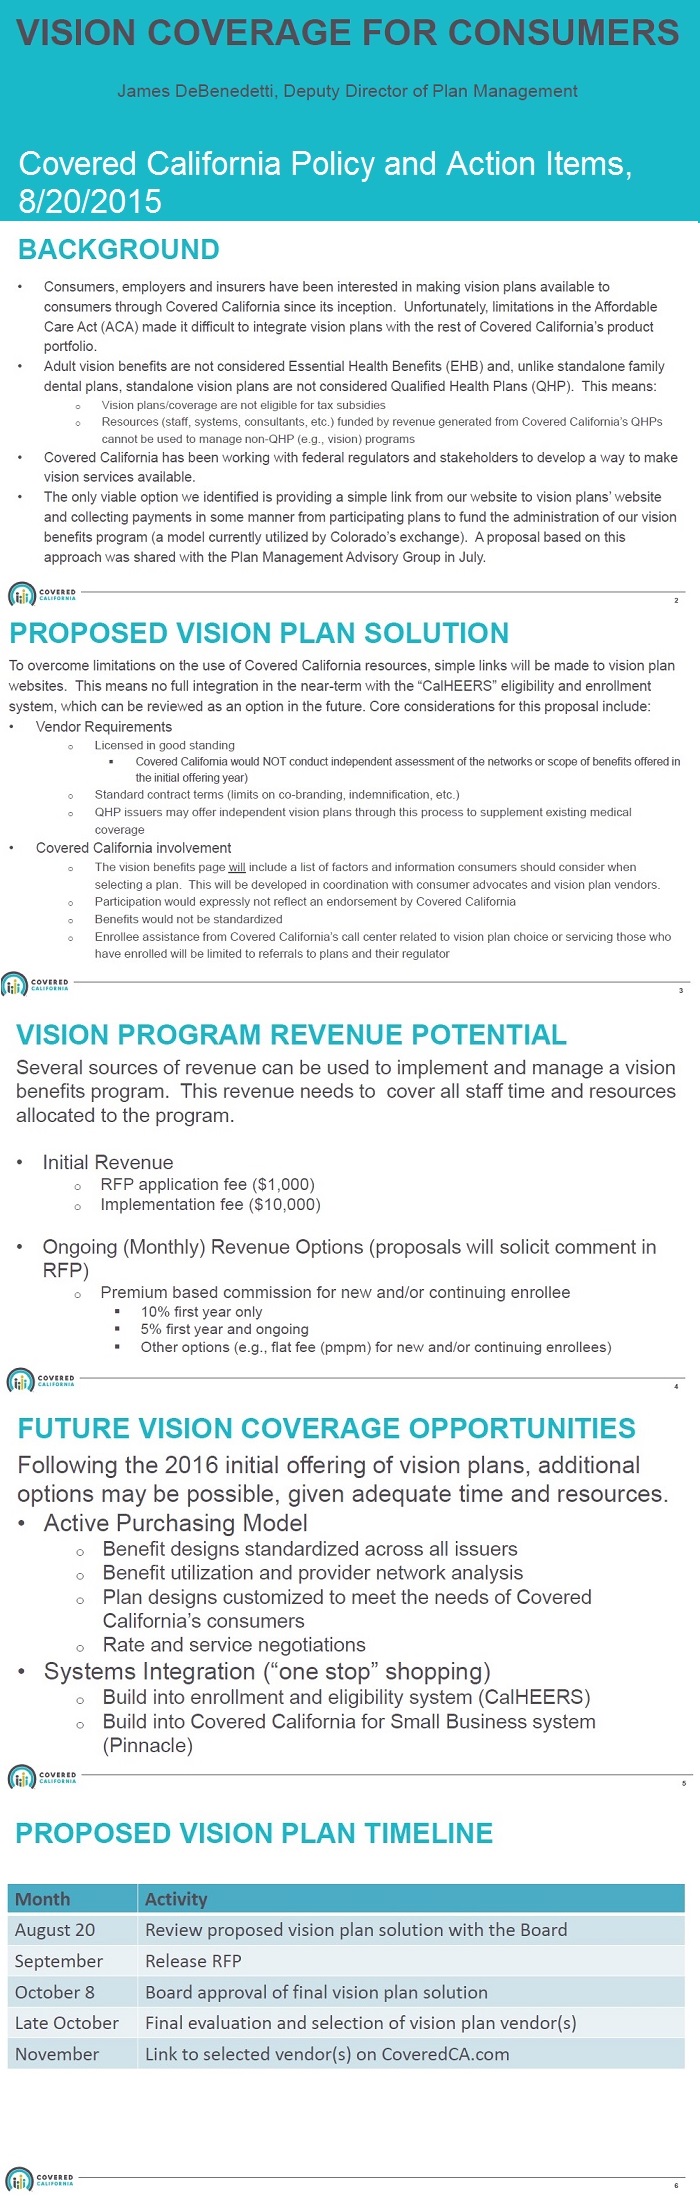 2016 vision insurance proposal reviewed by the Covered California Board in August 20, 2015.